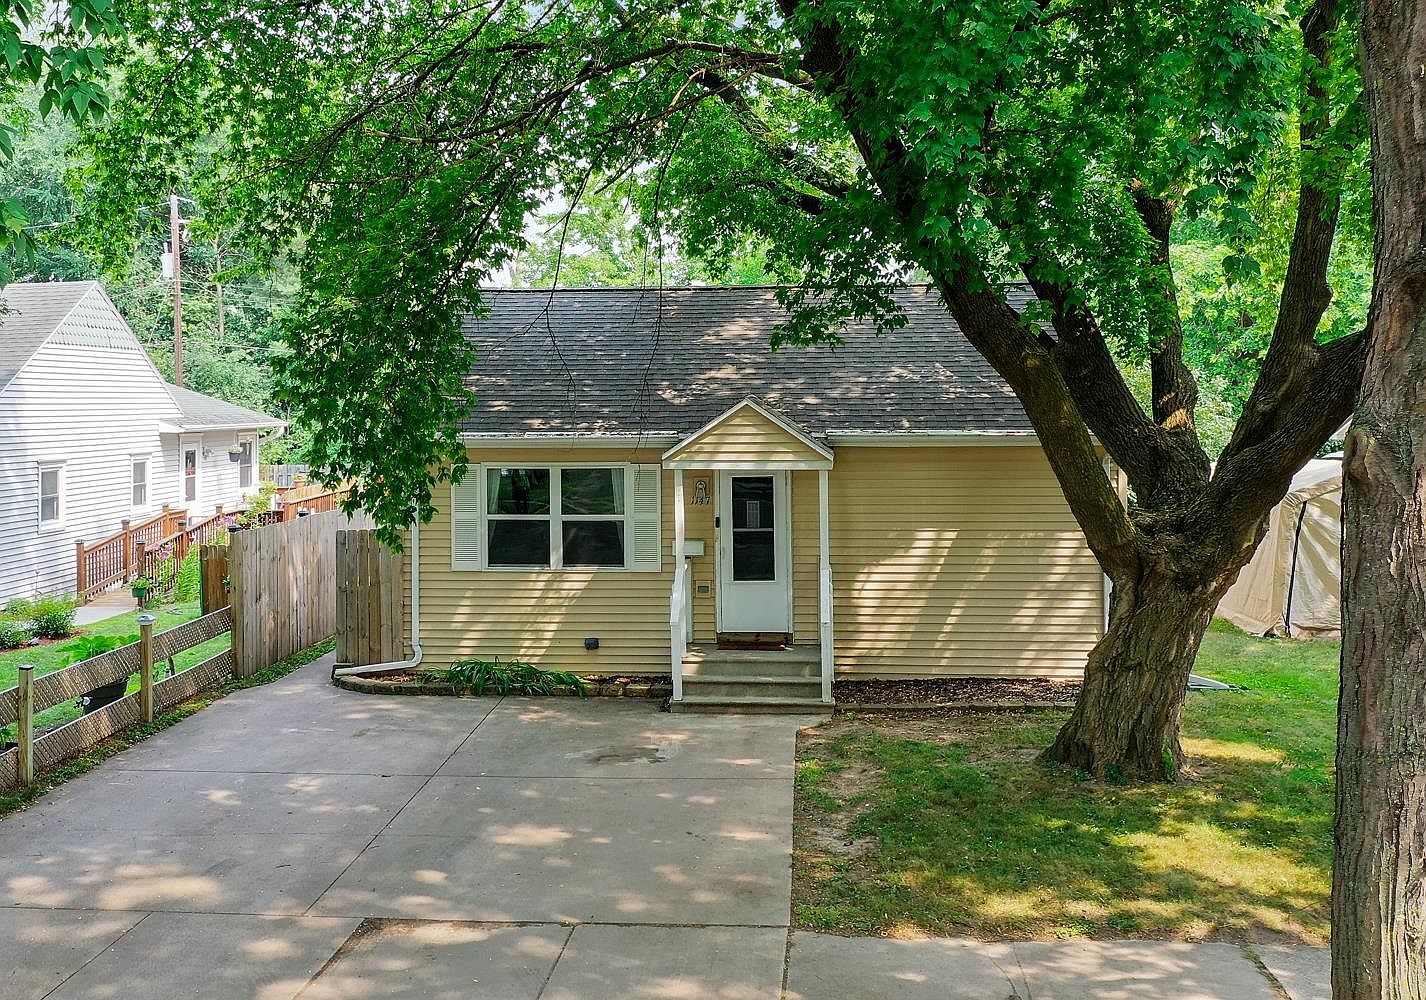 1147 S Oakland Ave, Green Bay, WI 54304 Zillow